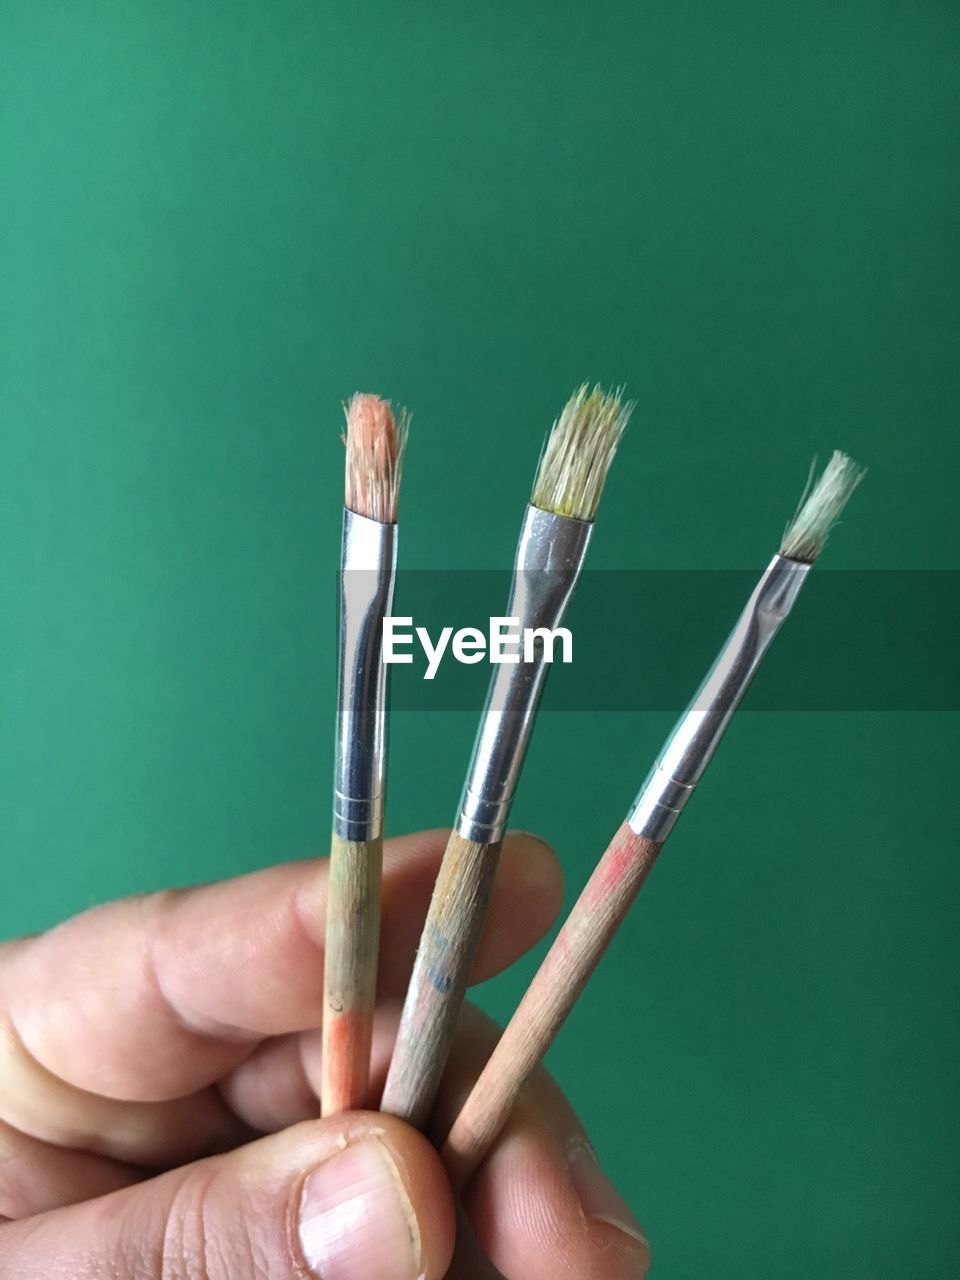 Cropped image of hand holding paintbrushes against green background